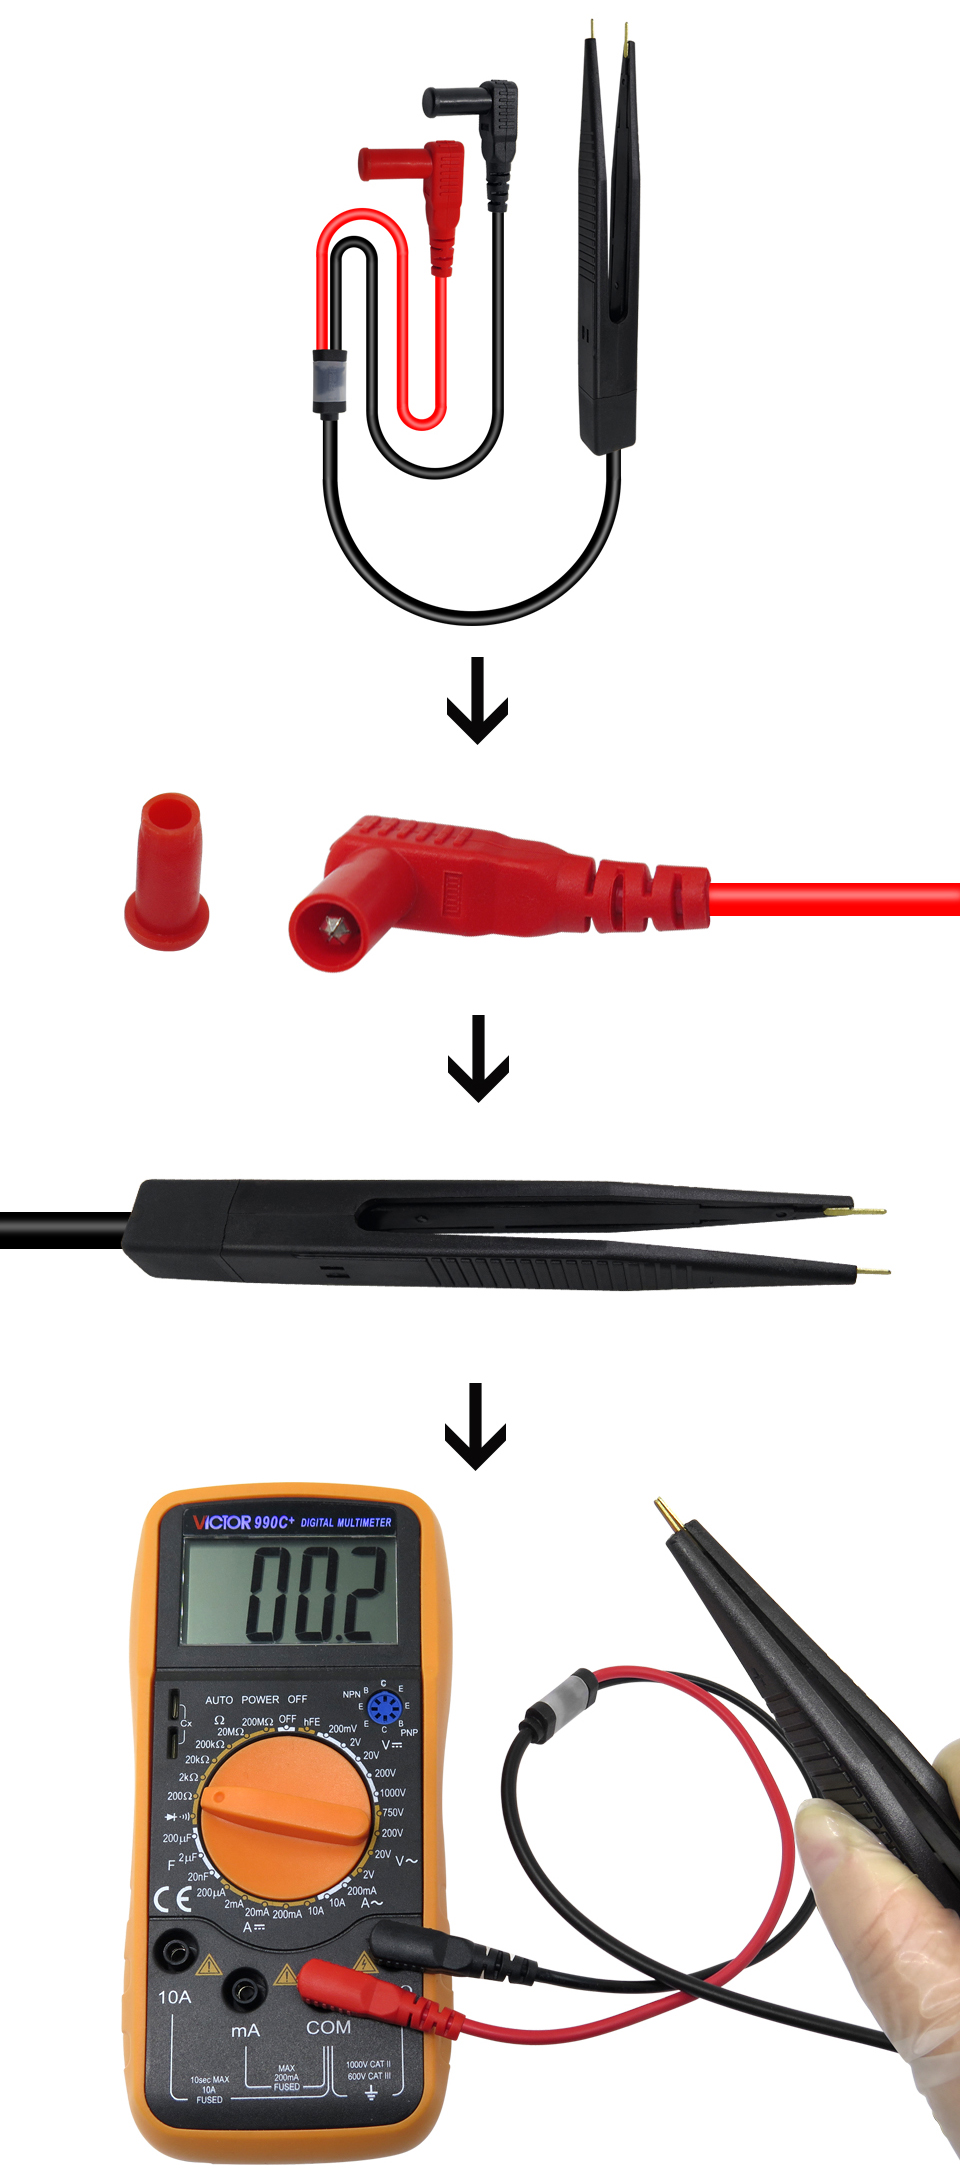 Cleqee-P1503E-Multimeter-Test-Probe-Test-Leads-Kit-with-Tweezers-To-Banana-Plug-Cable-Replaceable-Ne-1564053-2